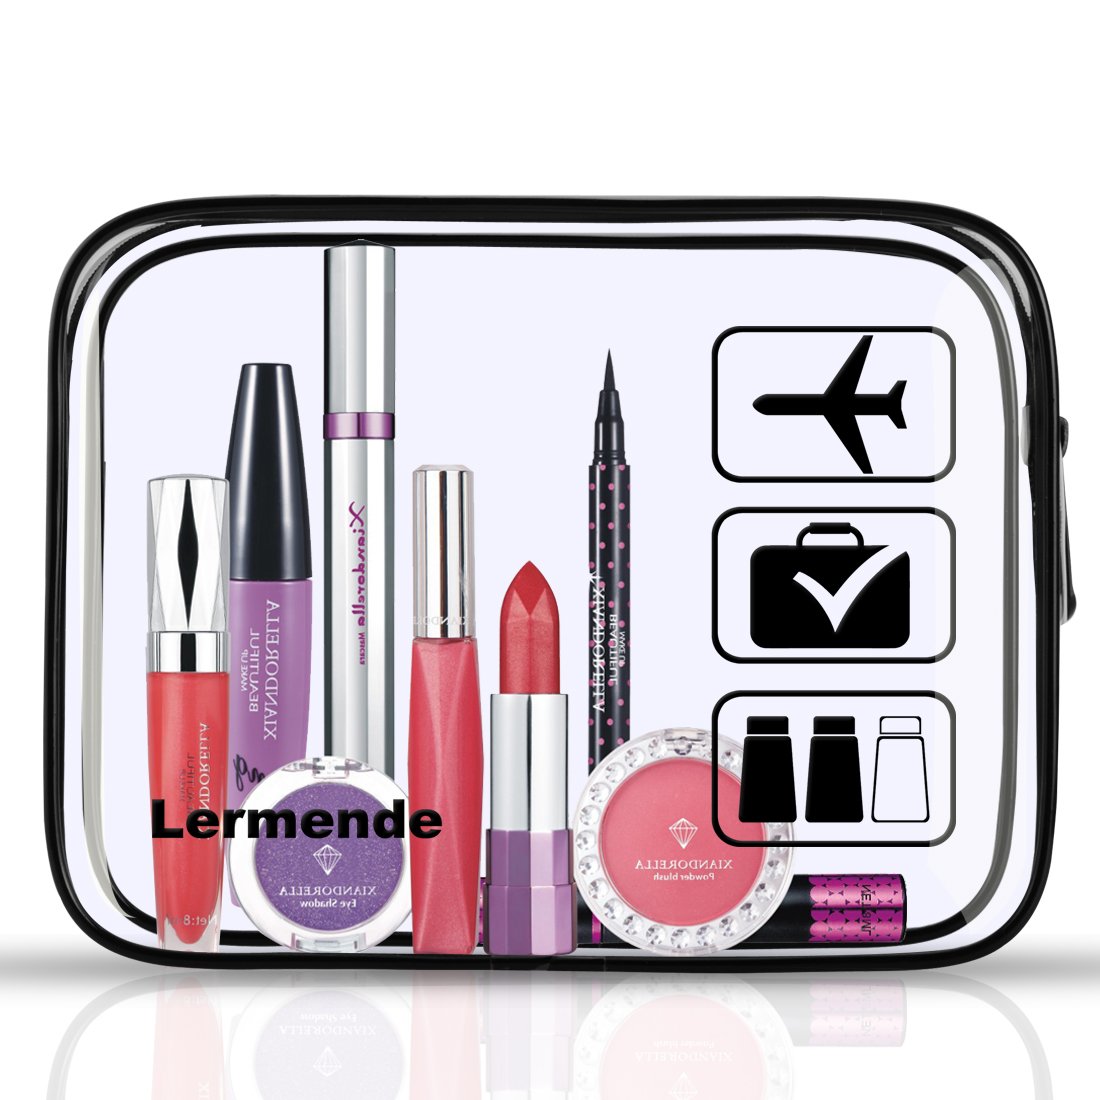 Lermende 3pcs TSA Approved Toiletry Bag with Zipper Travel Luggage Pouch Carry On Clear Airport Airline Compliant Bag Travel Cosmetic Makeup Bags for Men Women - Black